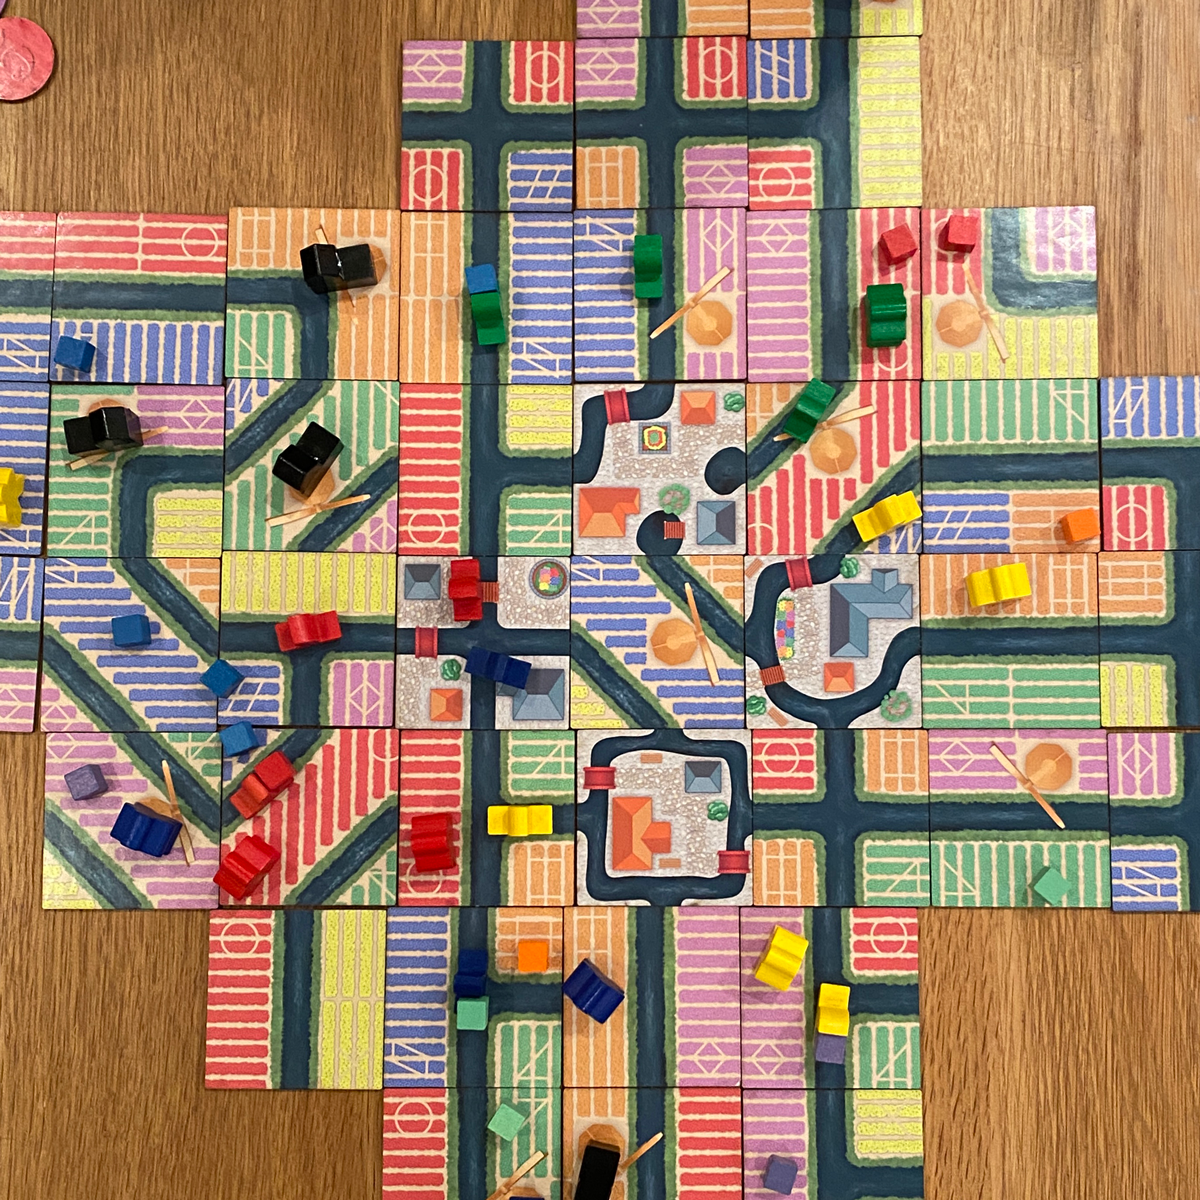 Blooming Industry at four player Image © Board Game Review UK